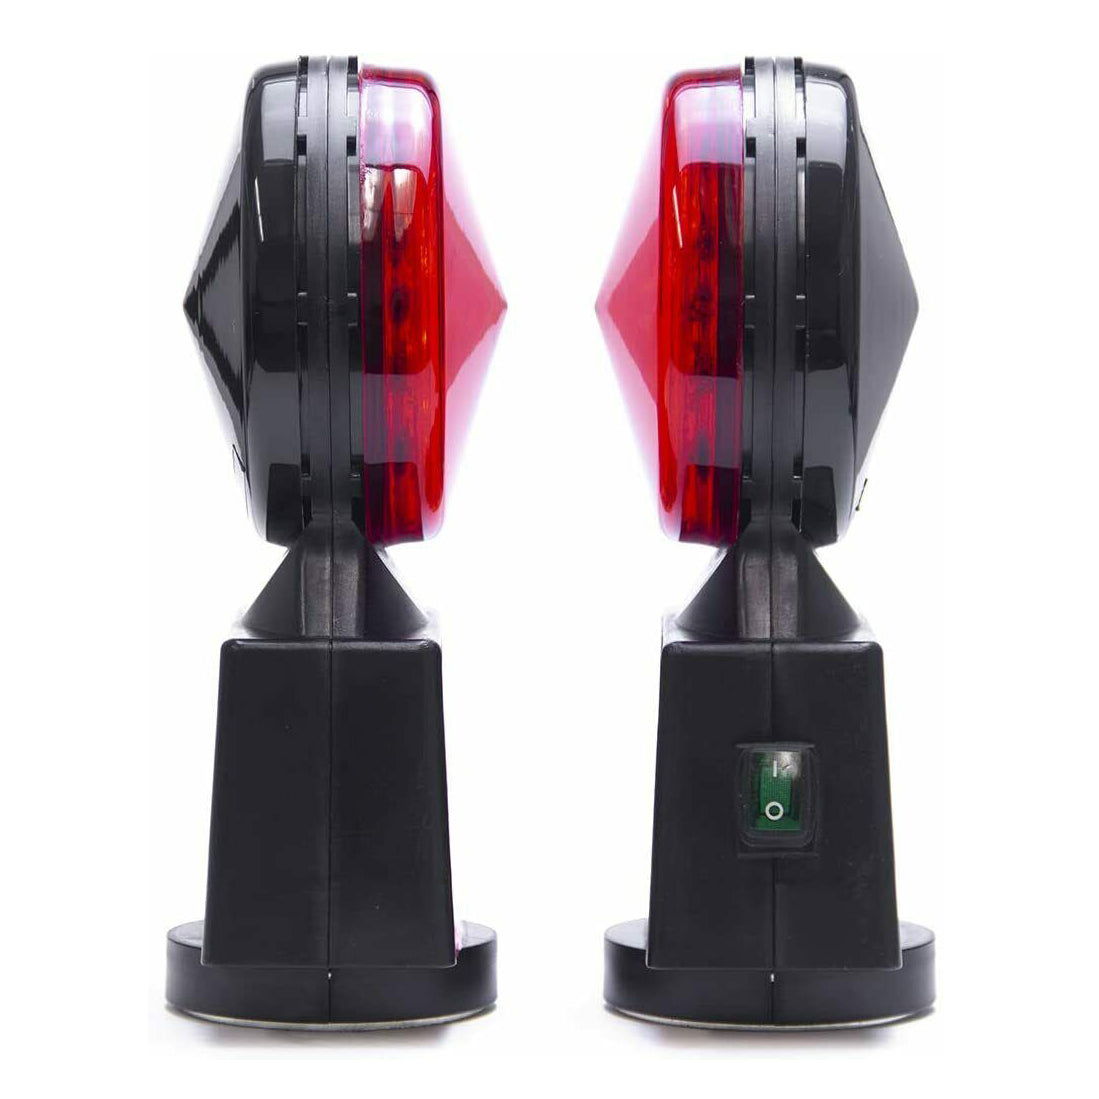 Wireless Trailer Tow Lights - Magnetic Mount - 65 Feet Range - 4 Pin Round Connection